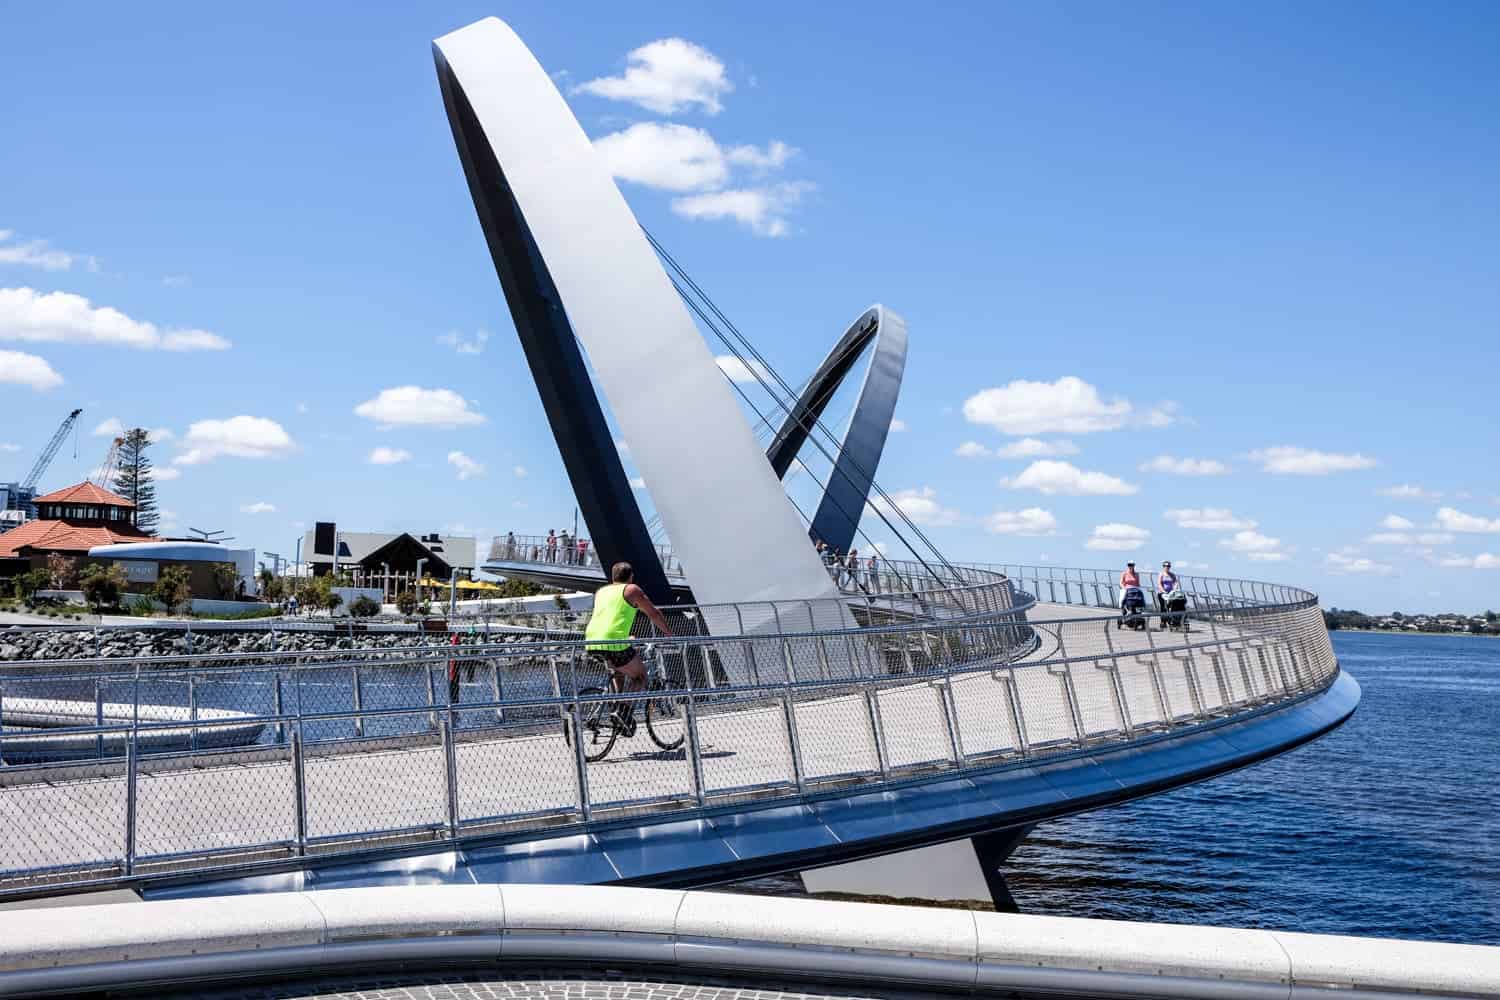 The winding bridges decorated with silver loop archways at the Elizabeth Quay waterfront development project in Perth